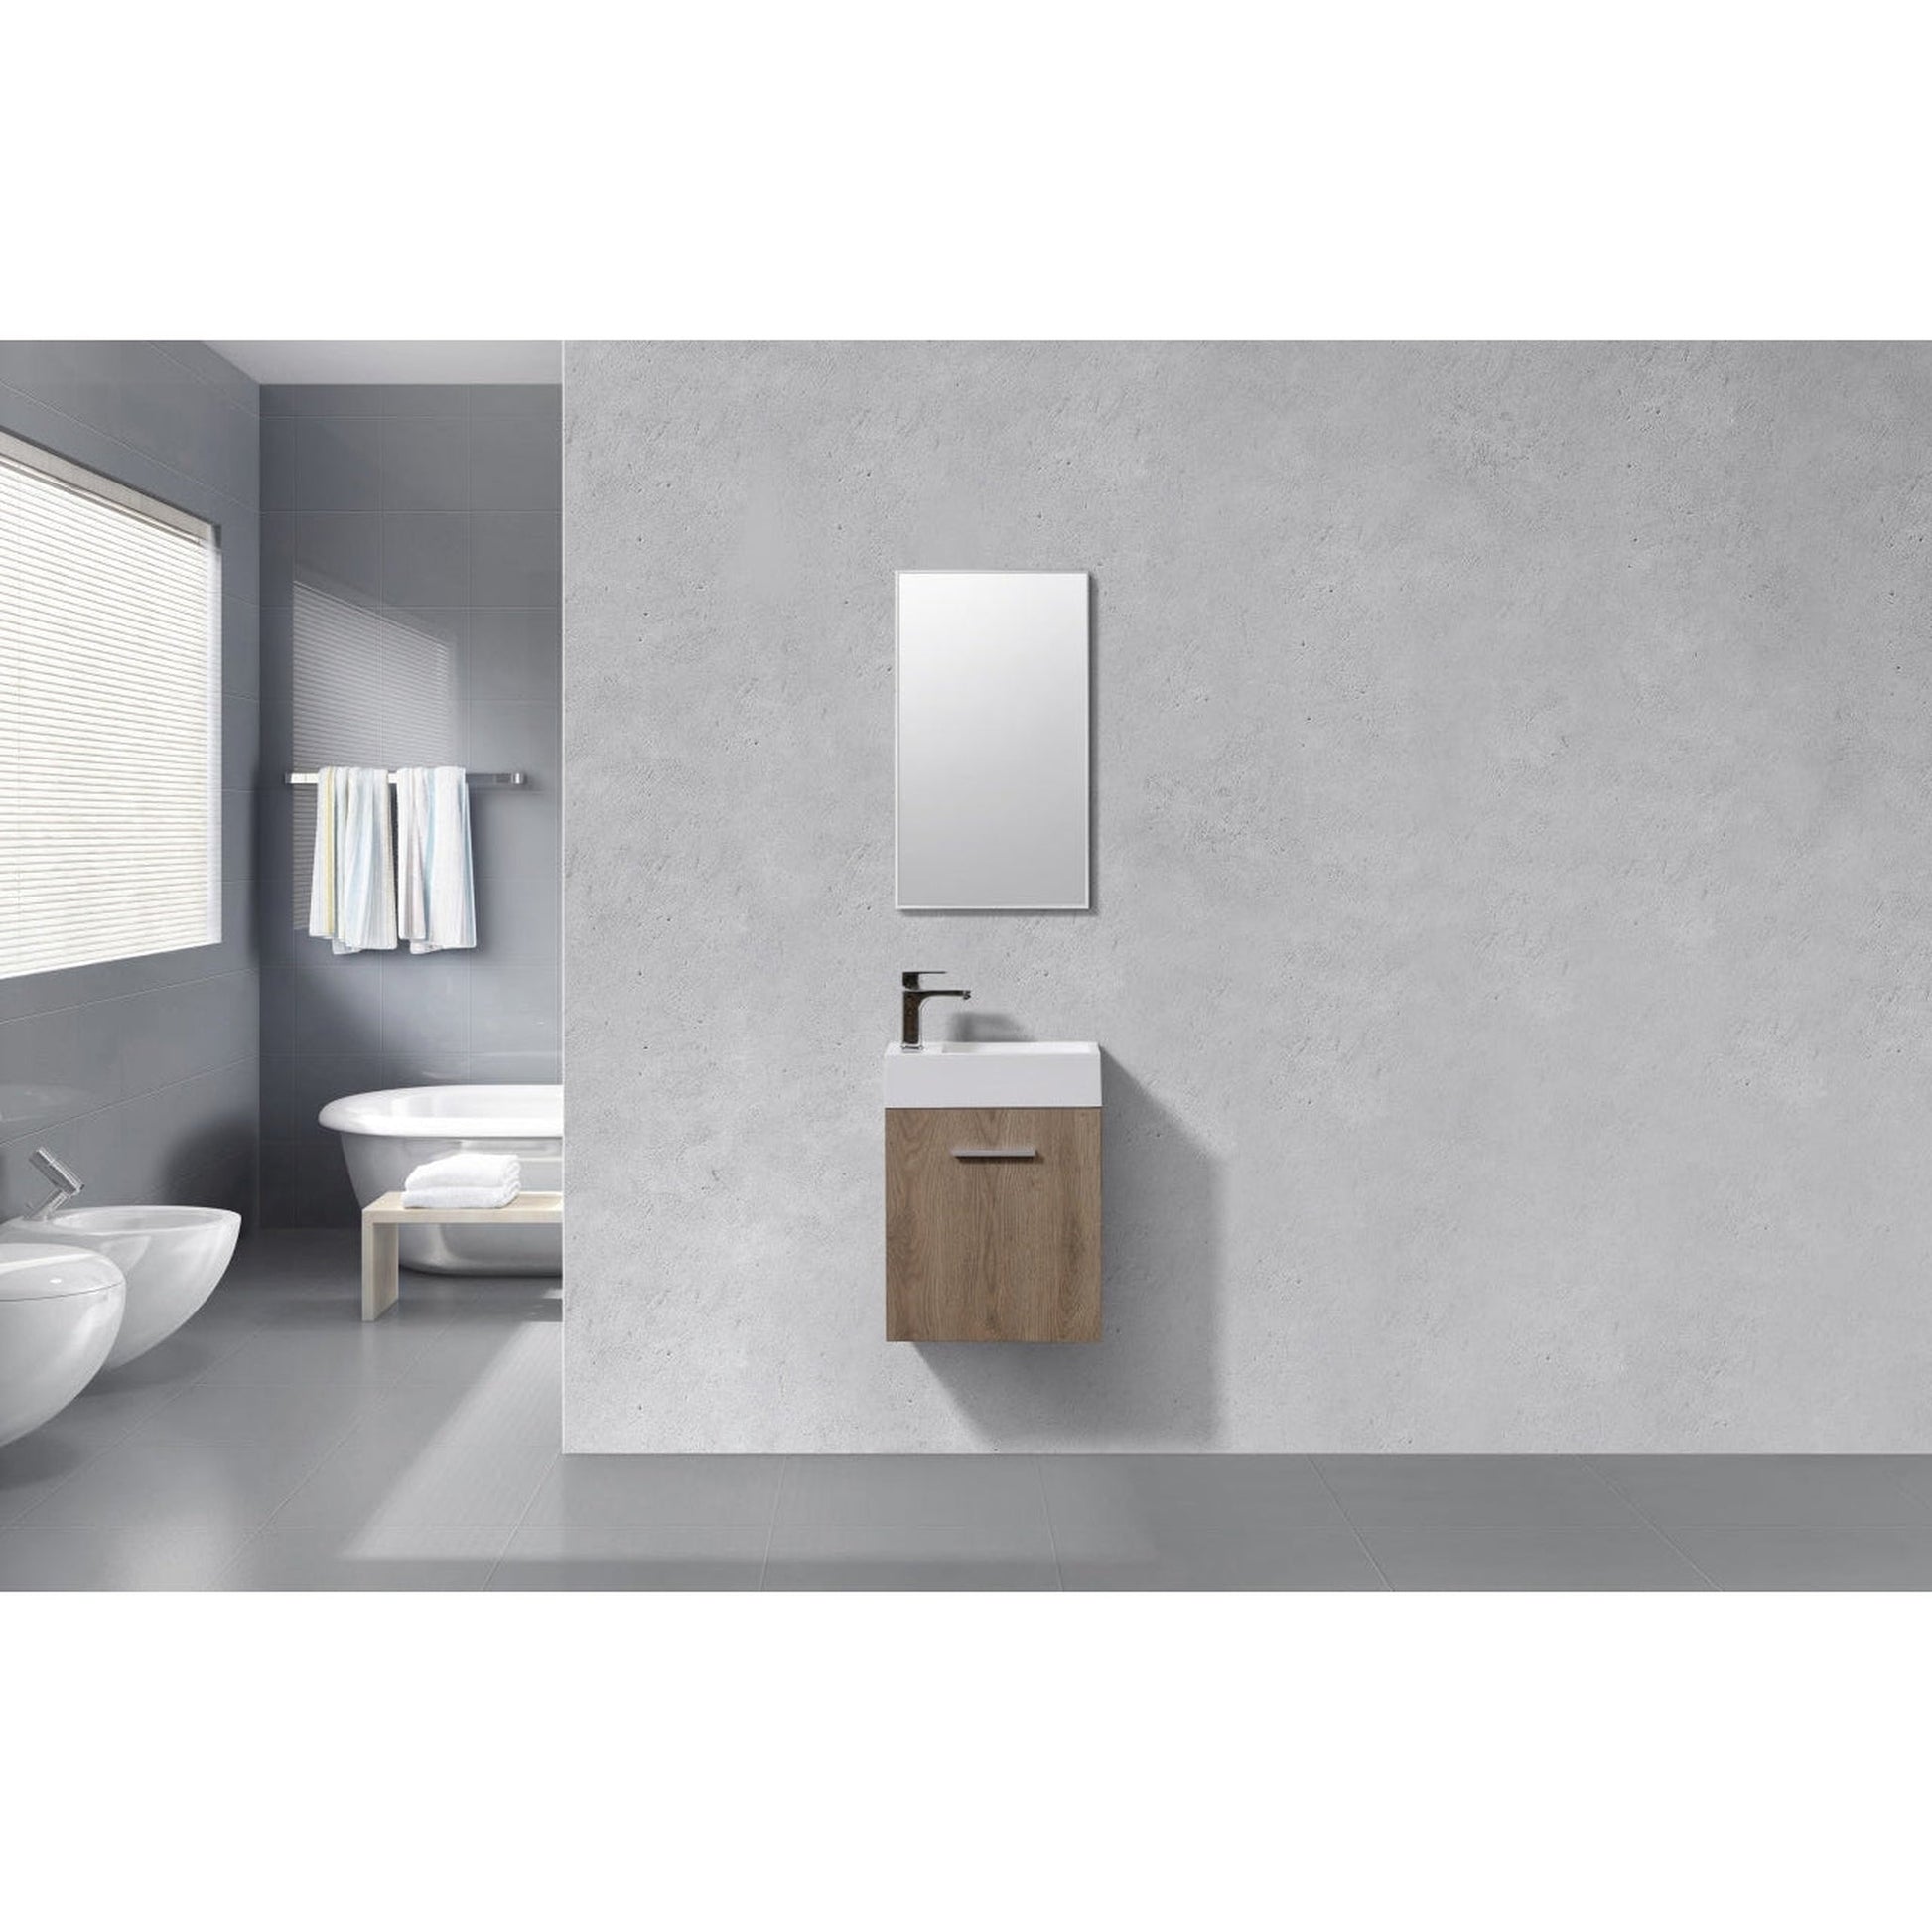 KubeBath Bliss 18" Butternut Wall-Mounted Modern Bathroom Vanity With Single Integrated Acrylic Sink With Overflow and 24" Butternut Framed Mirror With Shelf